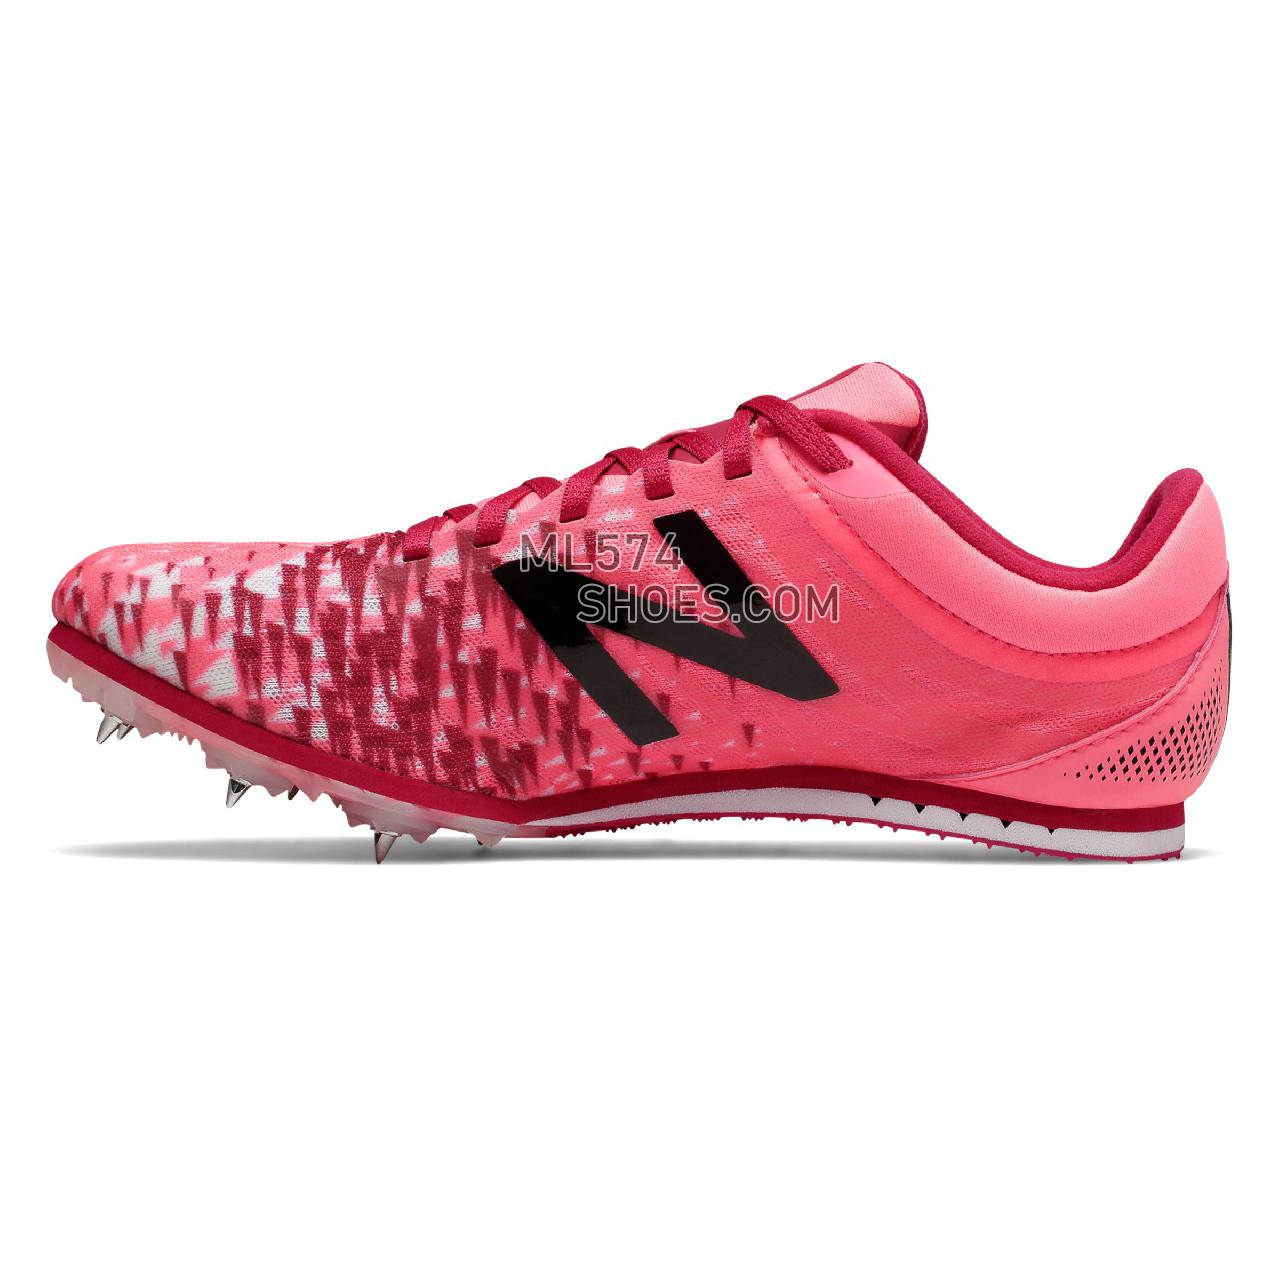 New Balance MD500v5 Spike - Women's Md500V5 Spike - Running - Guava with Pink - WMD500F5